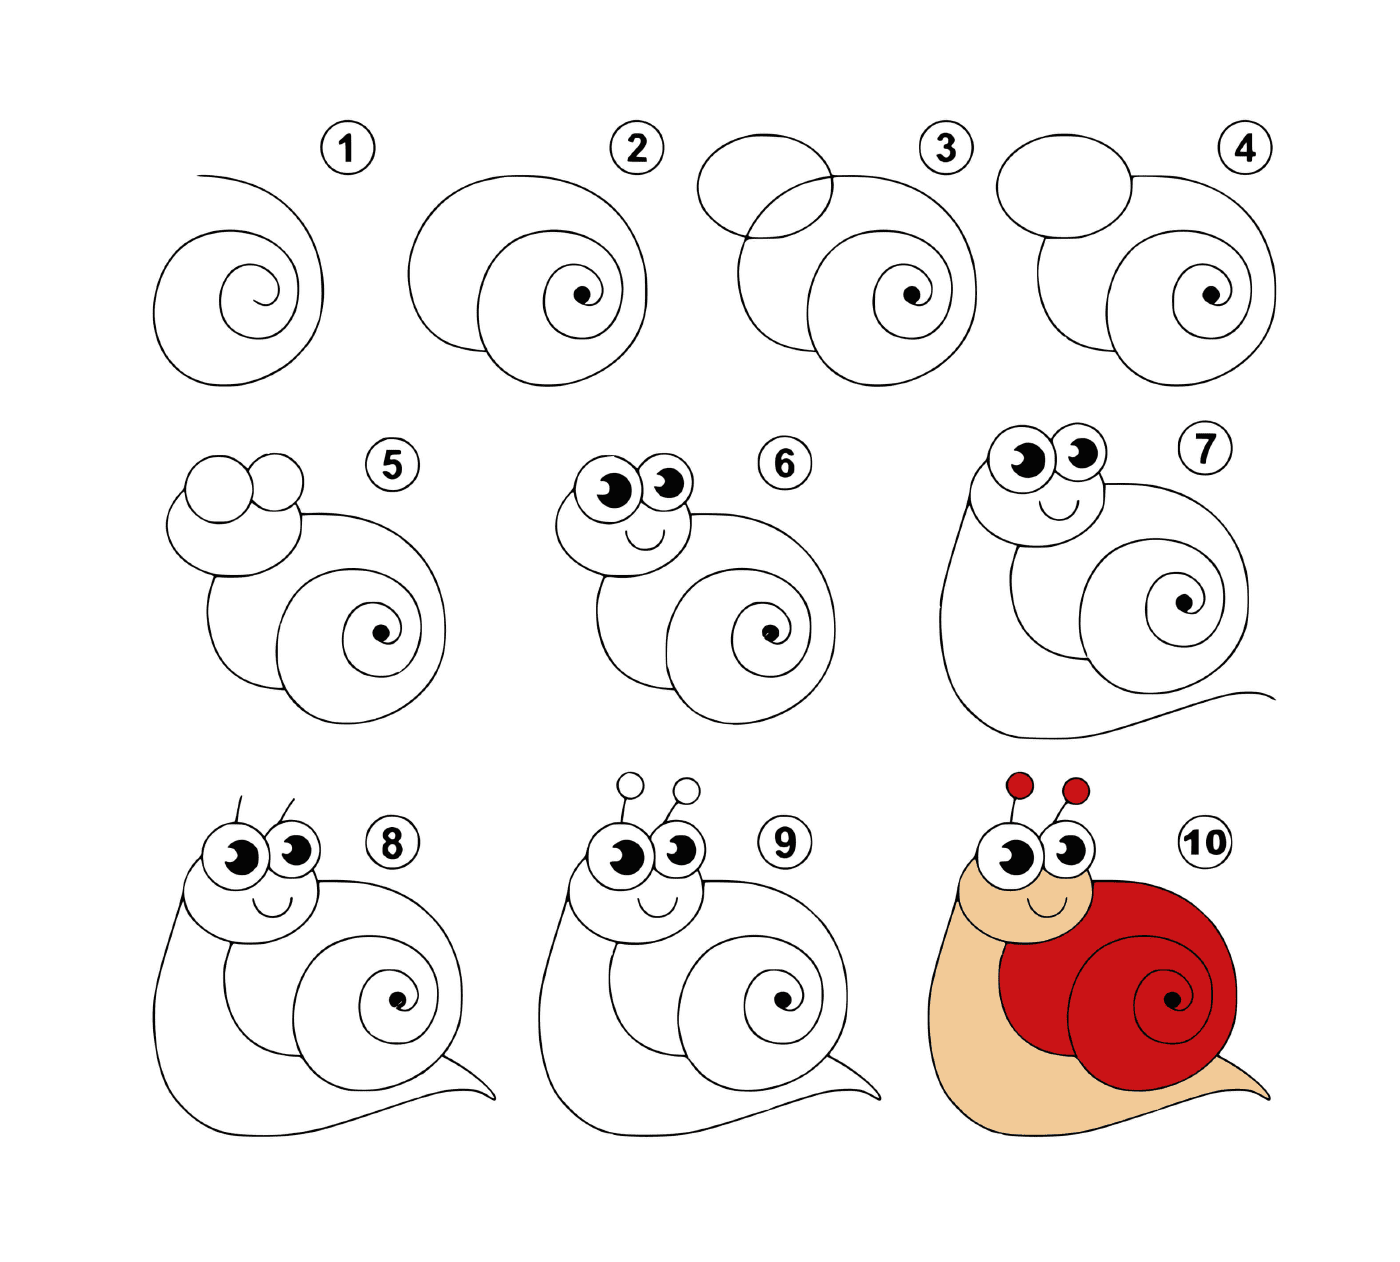  How to draw a snail easily 